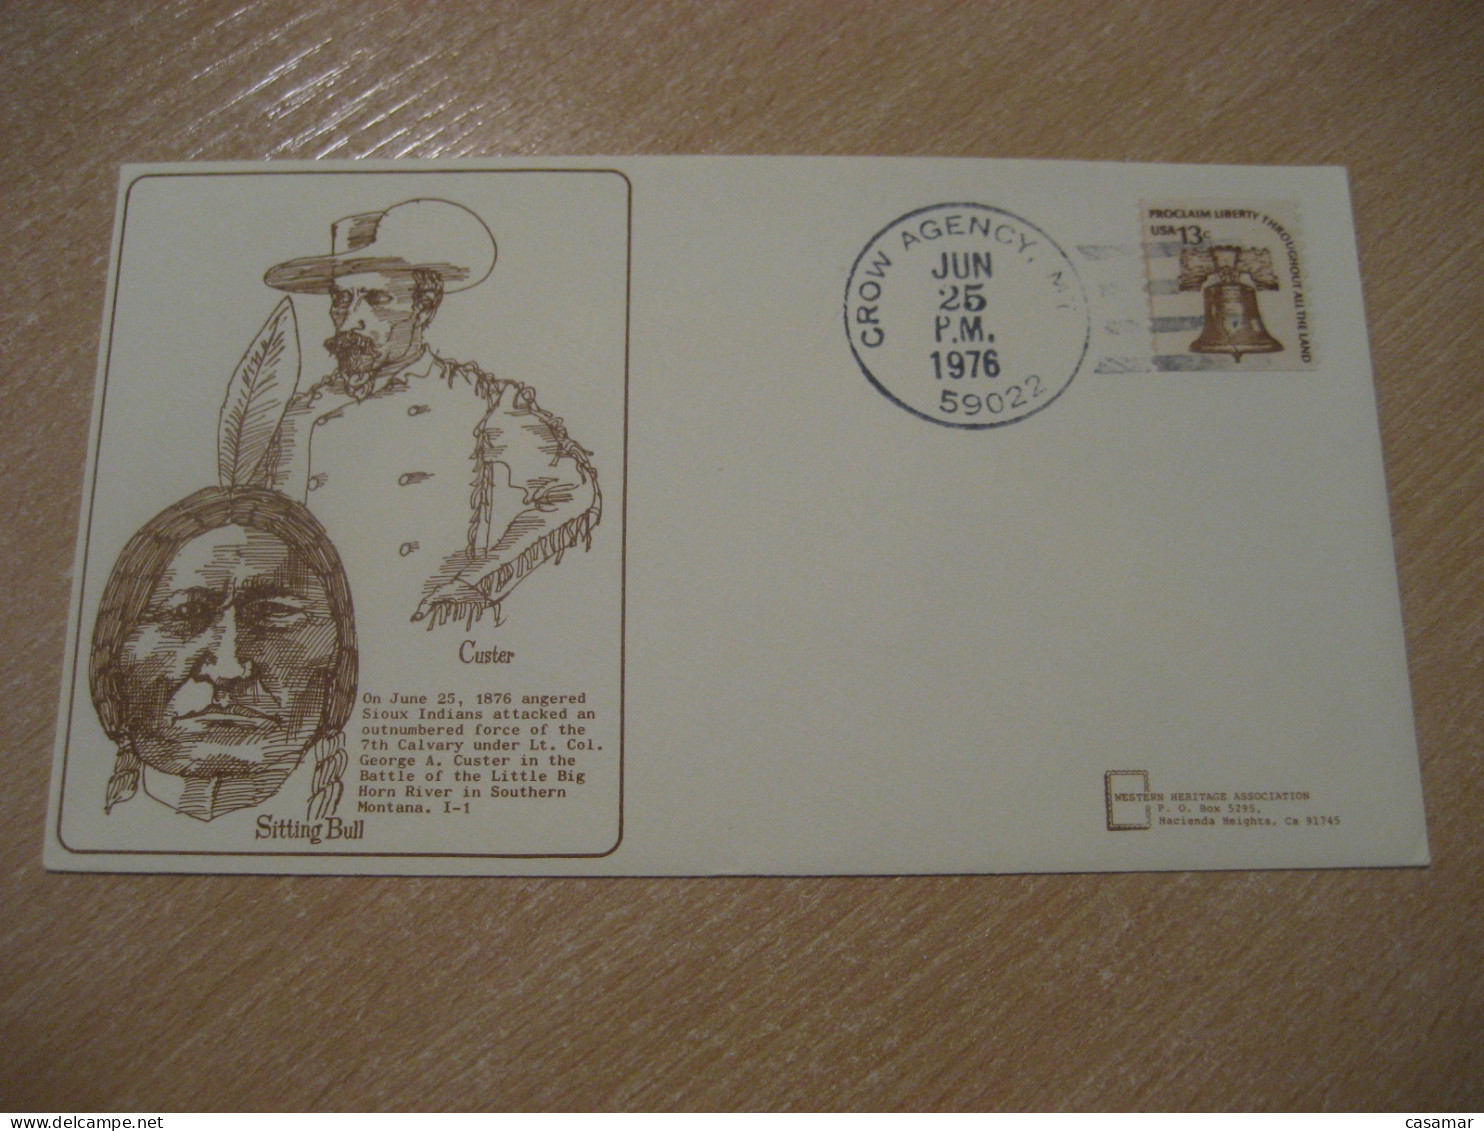 CROW AGENCY 1976 Custer Sitting Bull American Indians Indian Cancel Cover USA Indigenous Native History - Indianer